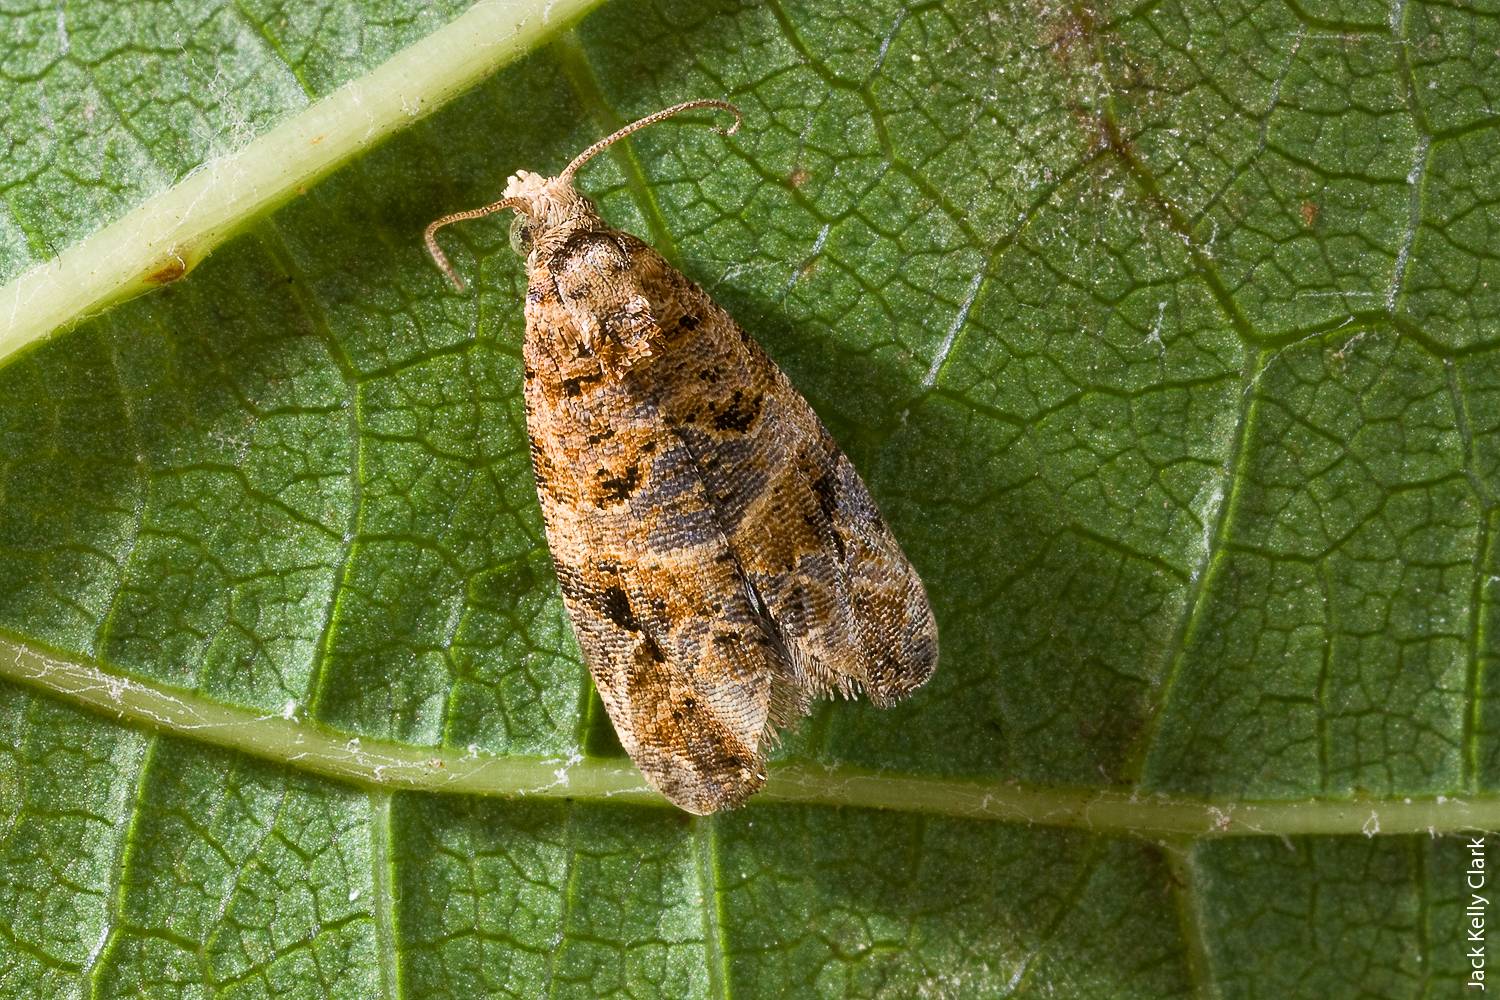 In 2009, European grapevine moth was first detected in the United States in Napa County, where it caused significant crop damage.